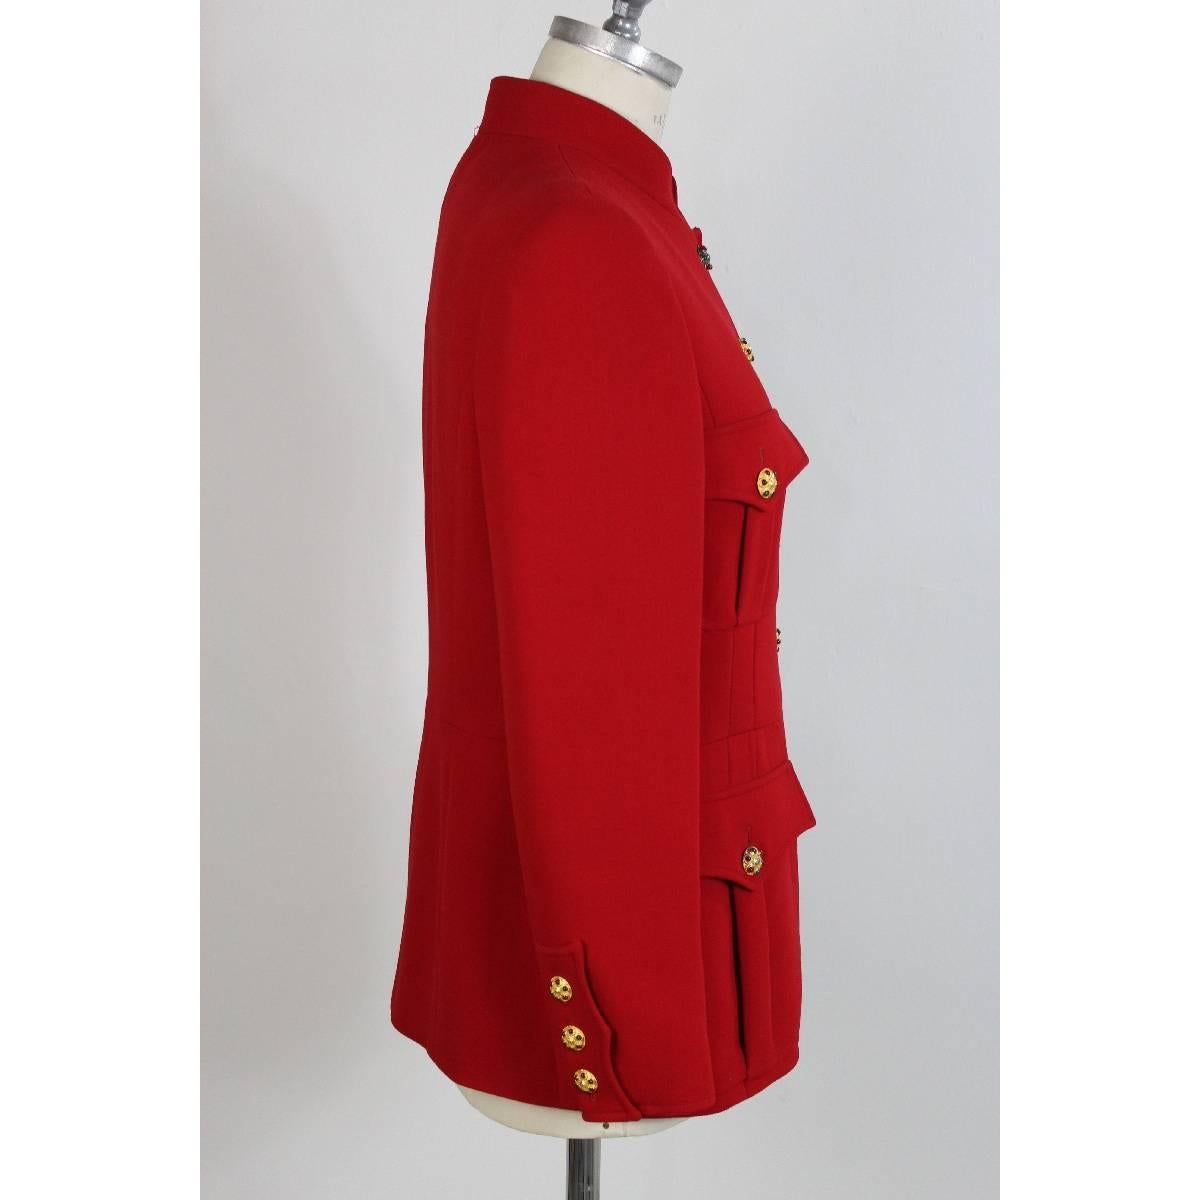 Red Chanel Boutique vintage wool red jacket button jewel size 42 made france 1980s